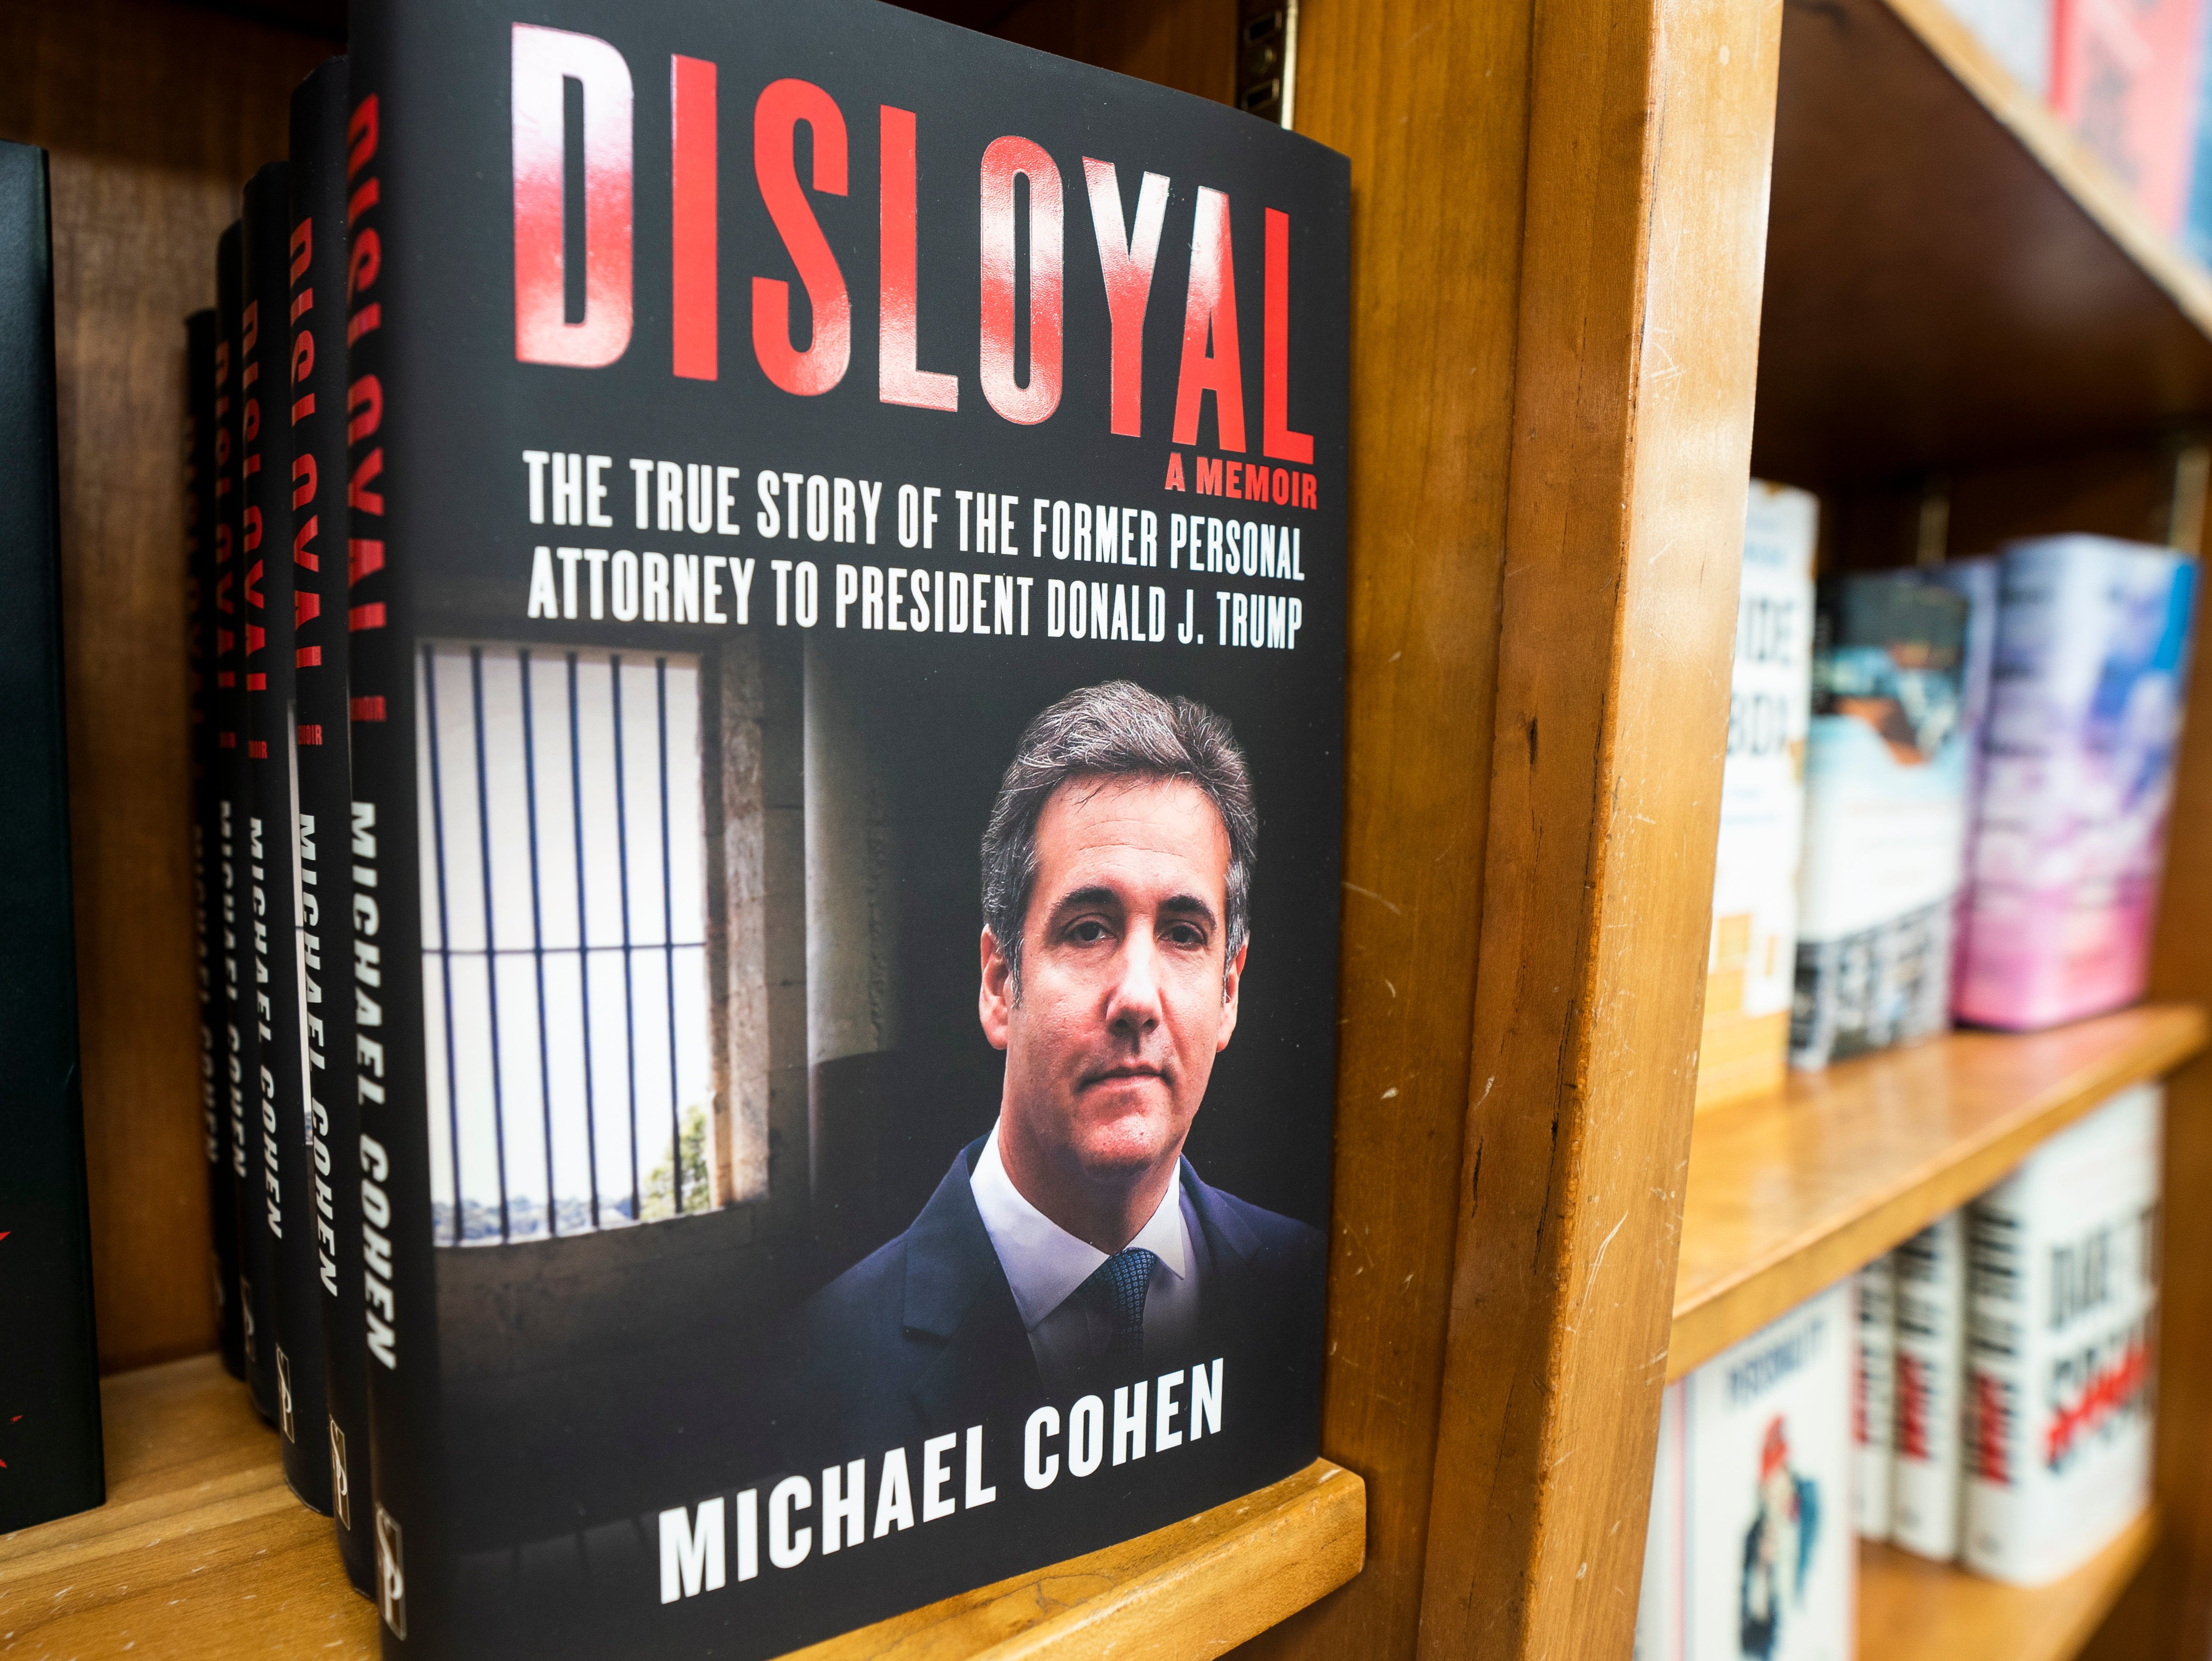 Copies of Michael Cohen’s book ‘Disloyal, a Memoir: The True Story of the Former personal attorney to President Donald Trump’ at the independent bookstore Politics and Prose in Washington, DC, on 10 September 2020